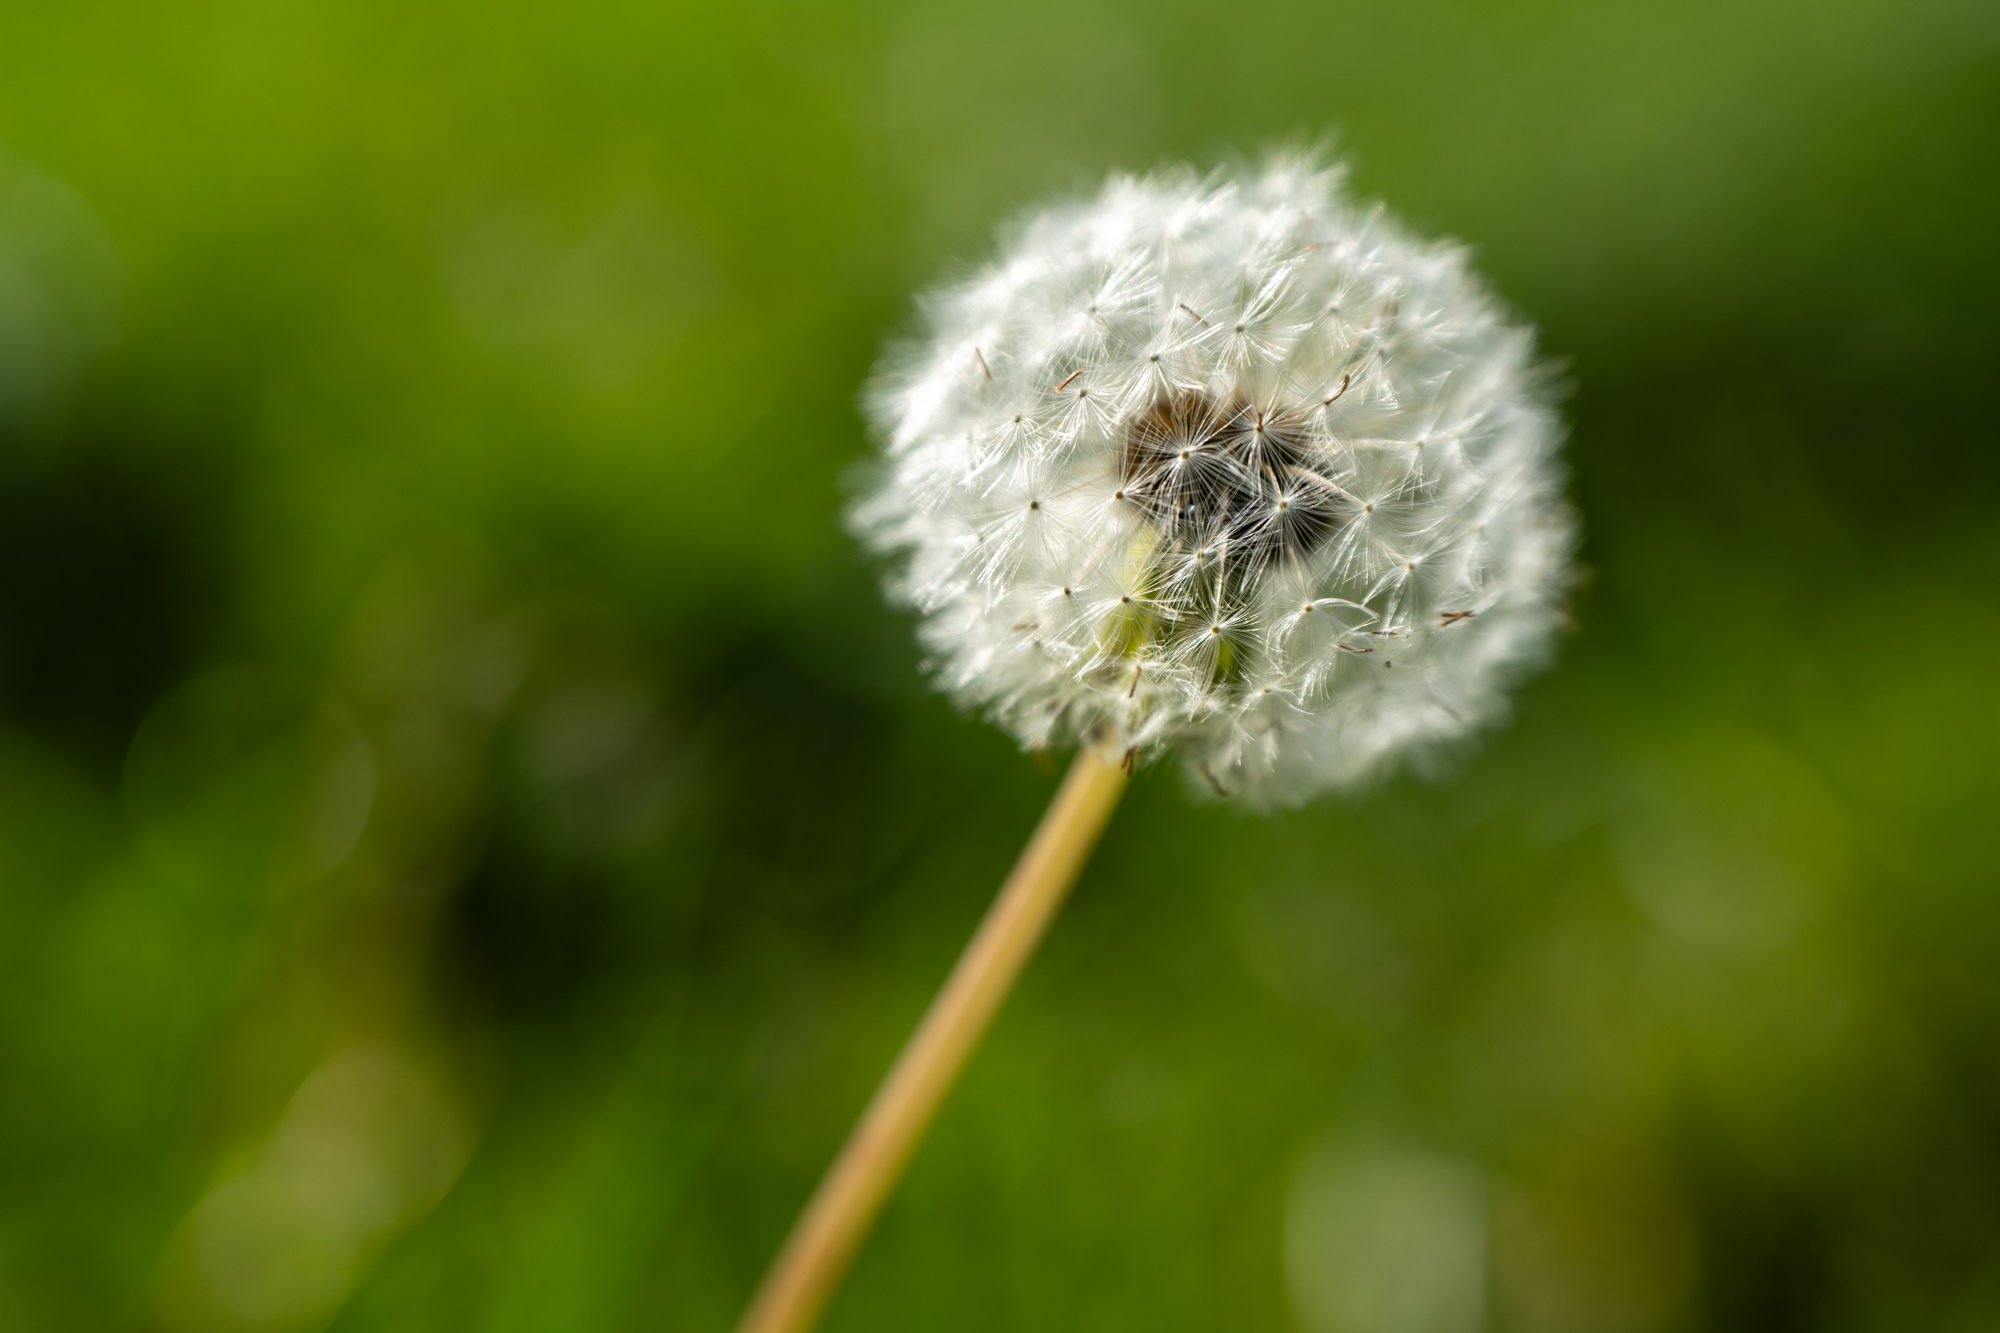 Close-up photo of a dandelion seed head taken with a Nikkor Z 70-180mm f/2.8